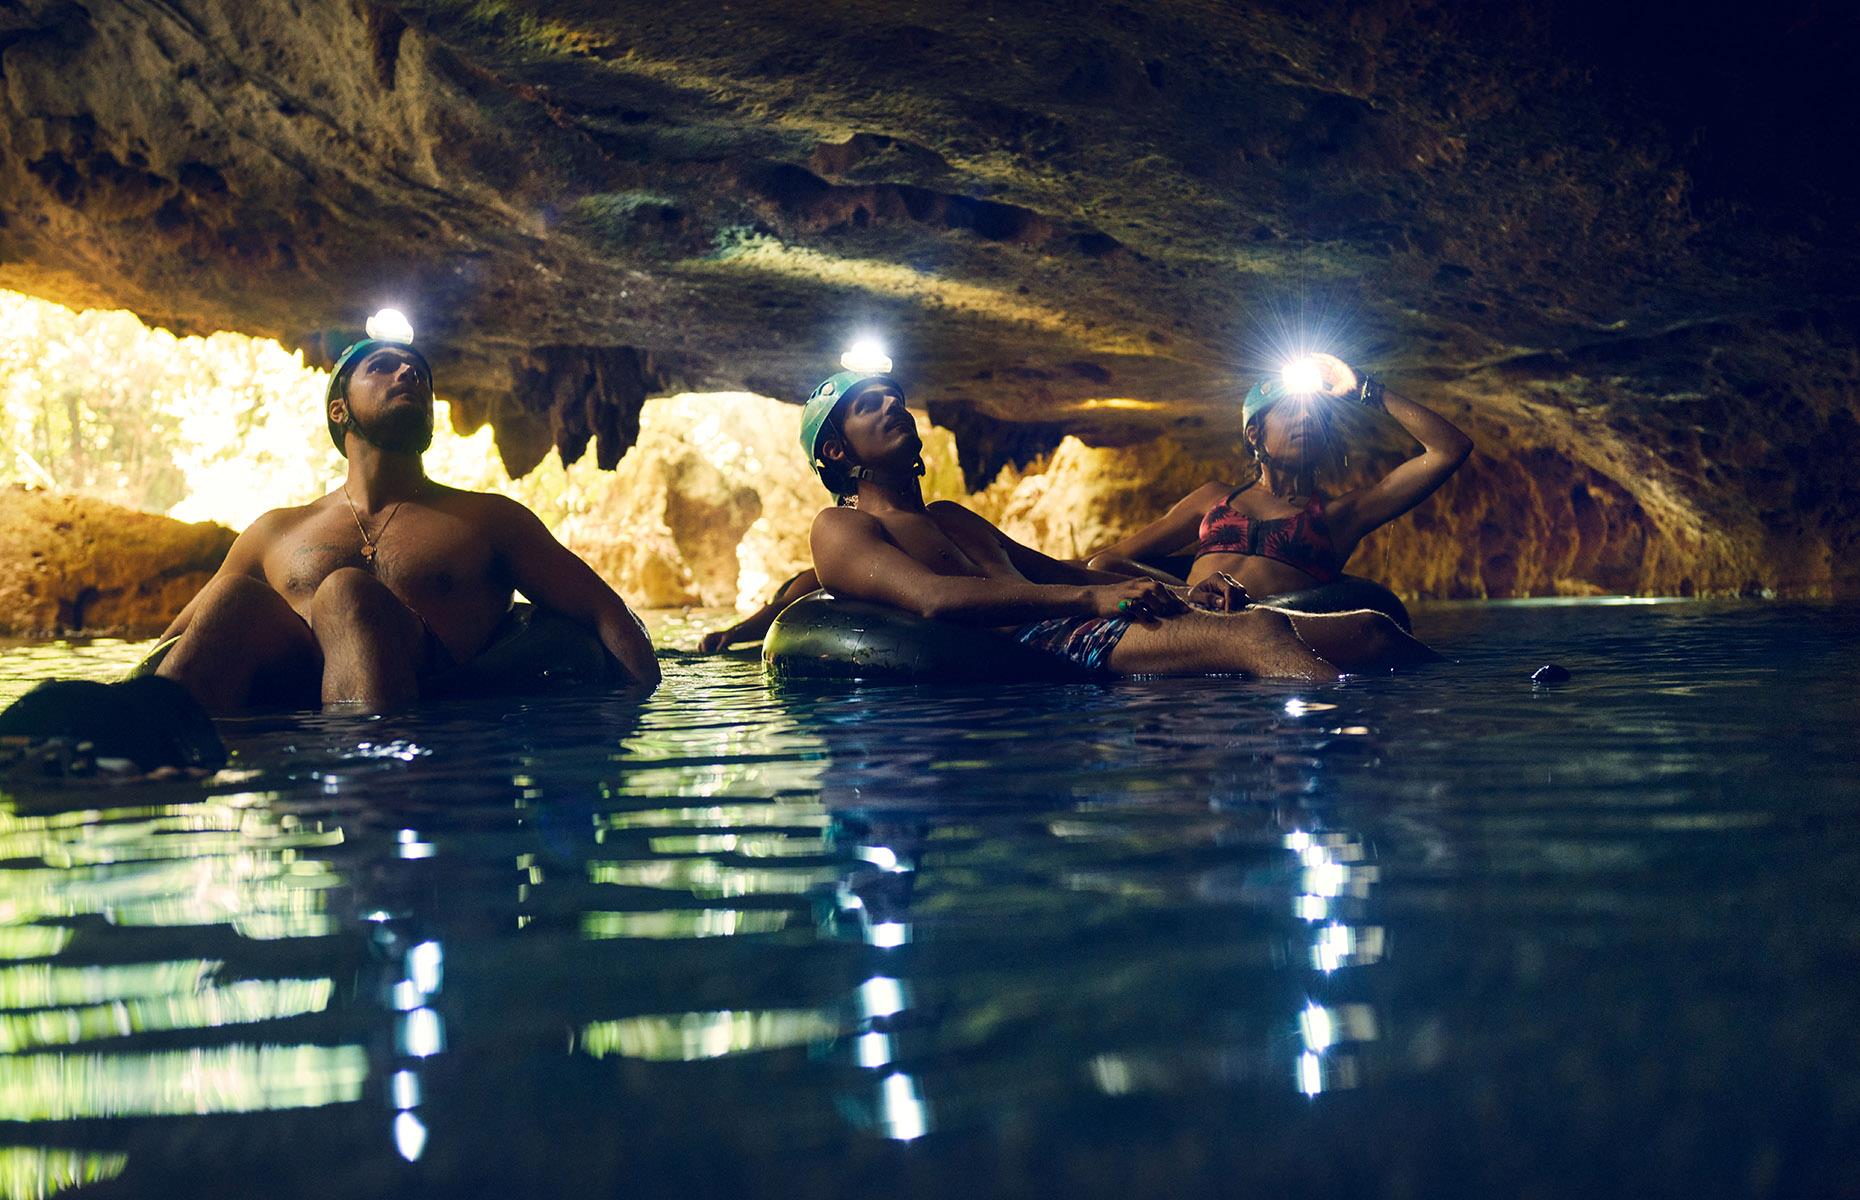 <p>Cave tubing may sound like an extreme sport, but once your eyes adjust to the light there's something strangely soothing about bobbing through a subterranean cavern on an inflatable tube, the water as calm and still as the stone ceiling. Stalactites will glide past, their tips trailing in the clear-blue water, so keep your headlamps trained as your guide steers your plastic armada downriver. There are several sites in Belize where you can cave tube, and St Herman's Cave is among the most popular.</p>